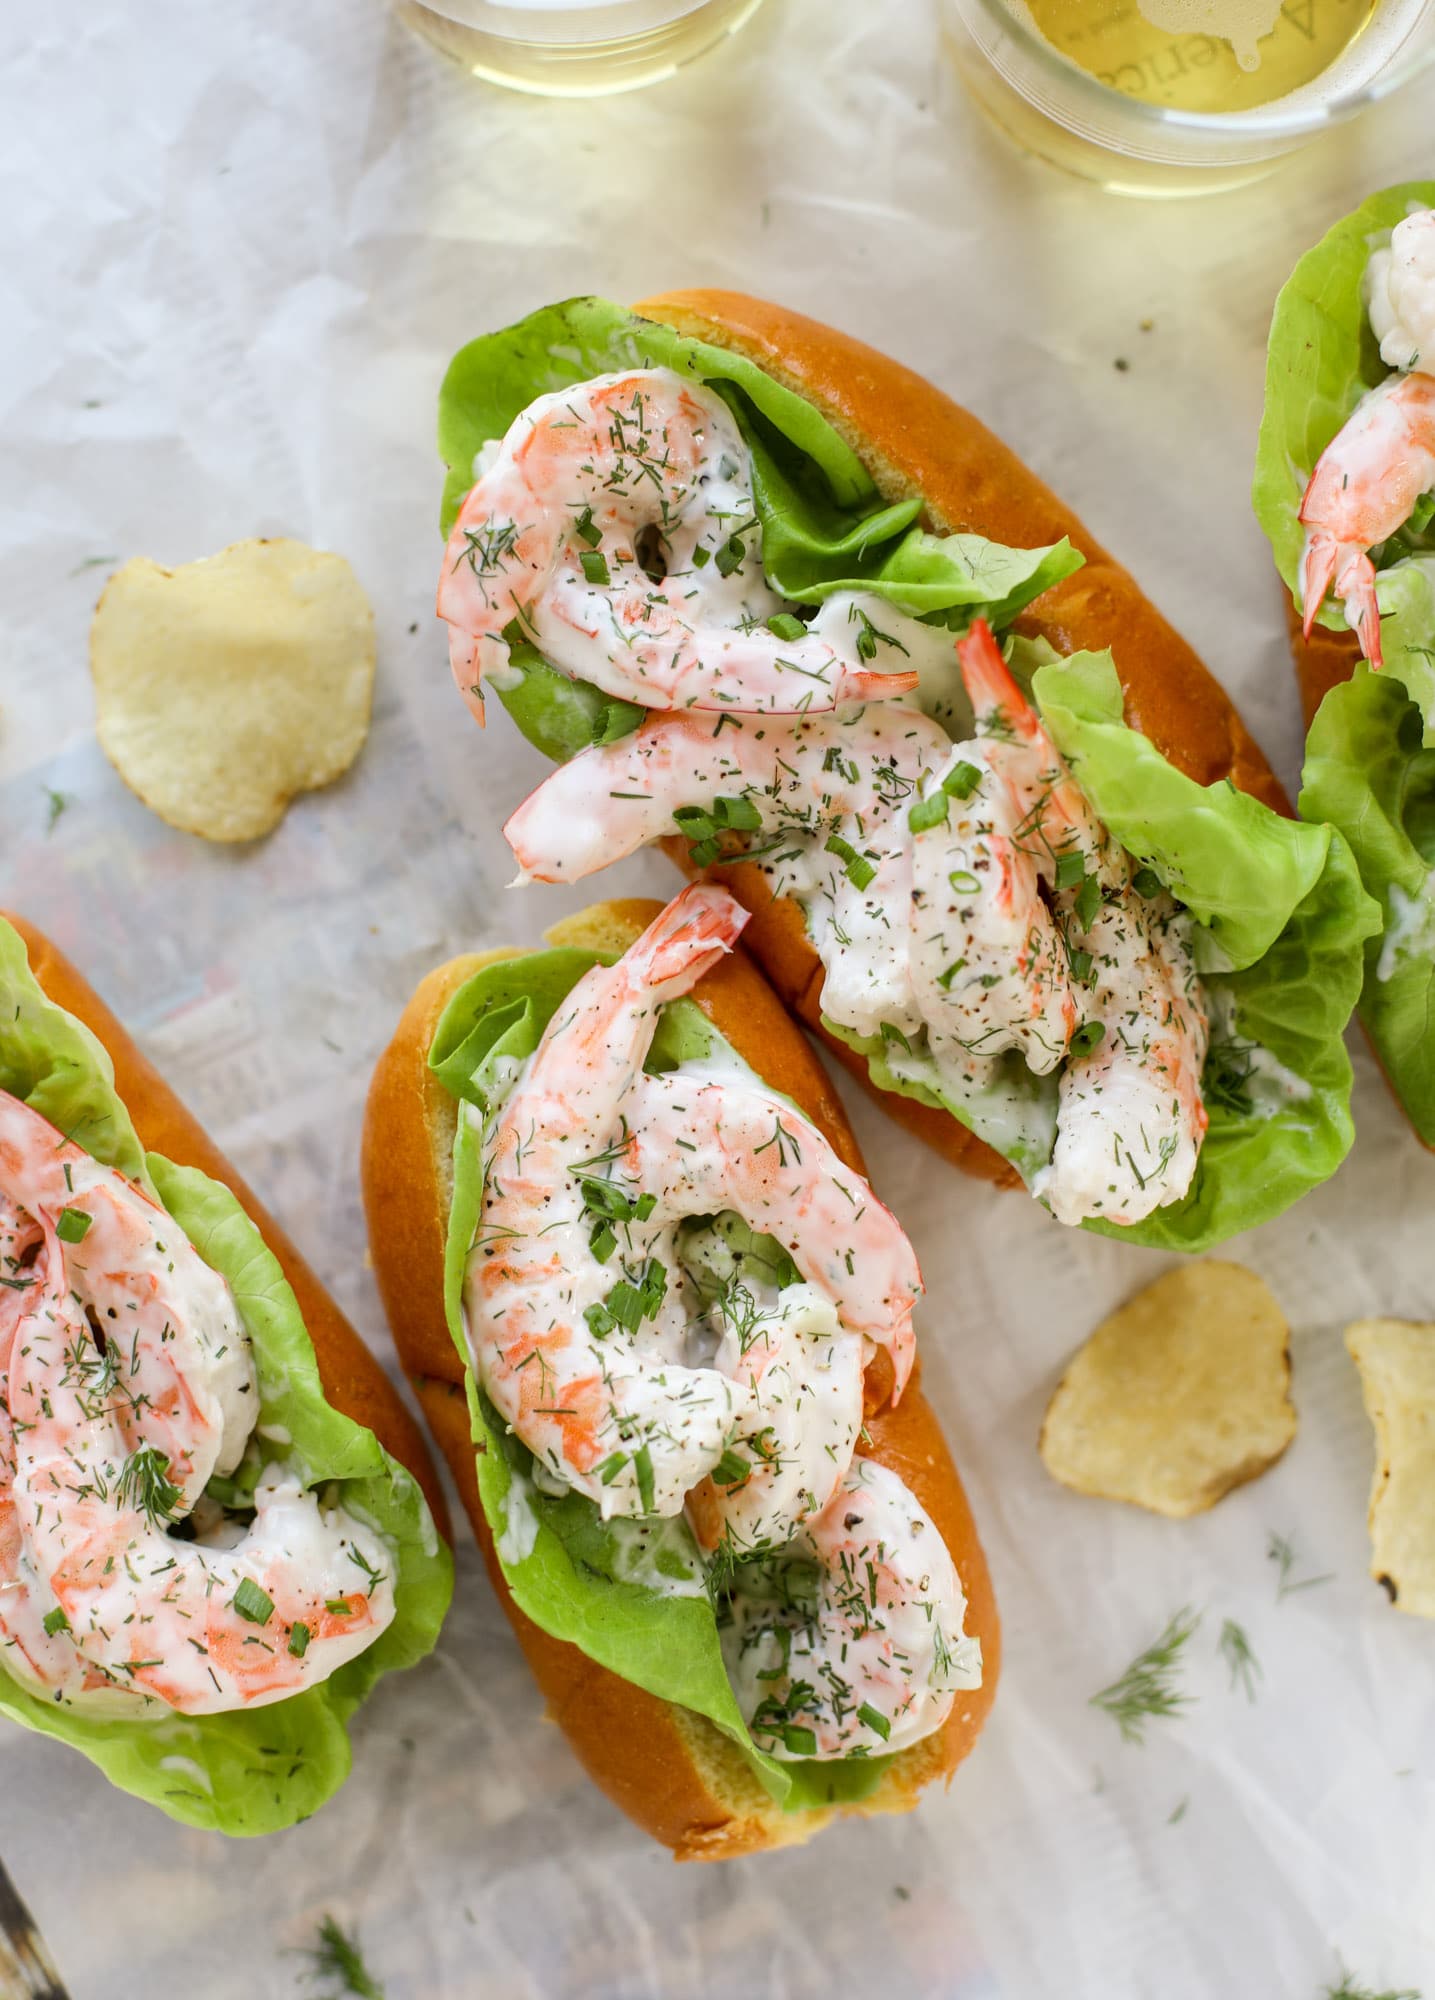 These shrimp salad rolls are my go-to simple, easy, no-cook dinner for hot summer day. Serve with pickles, potato chips and a spritz of lemon!